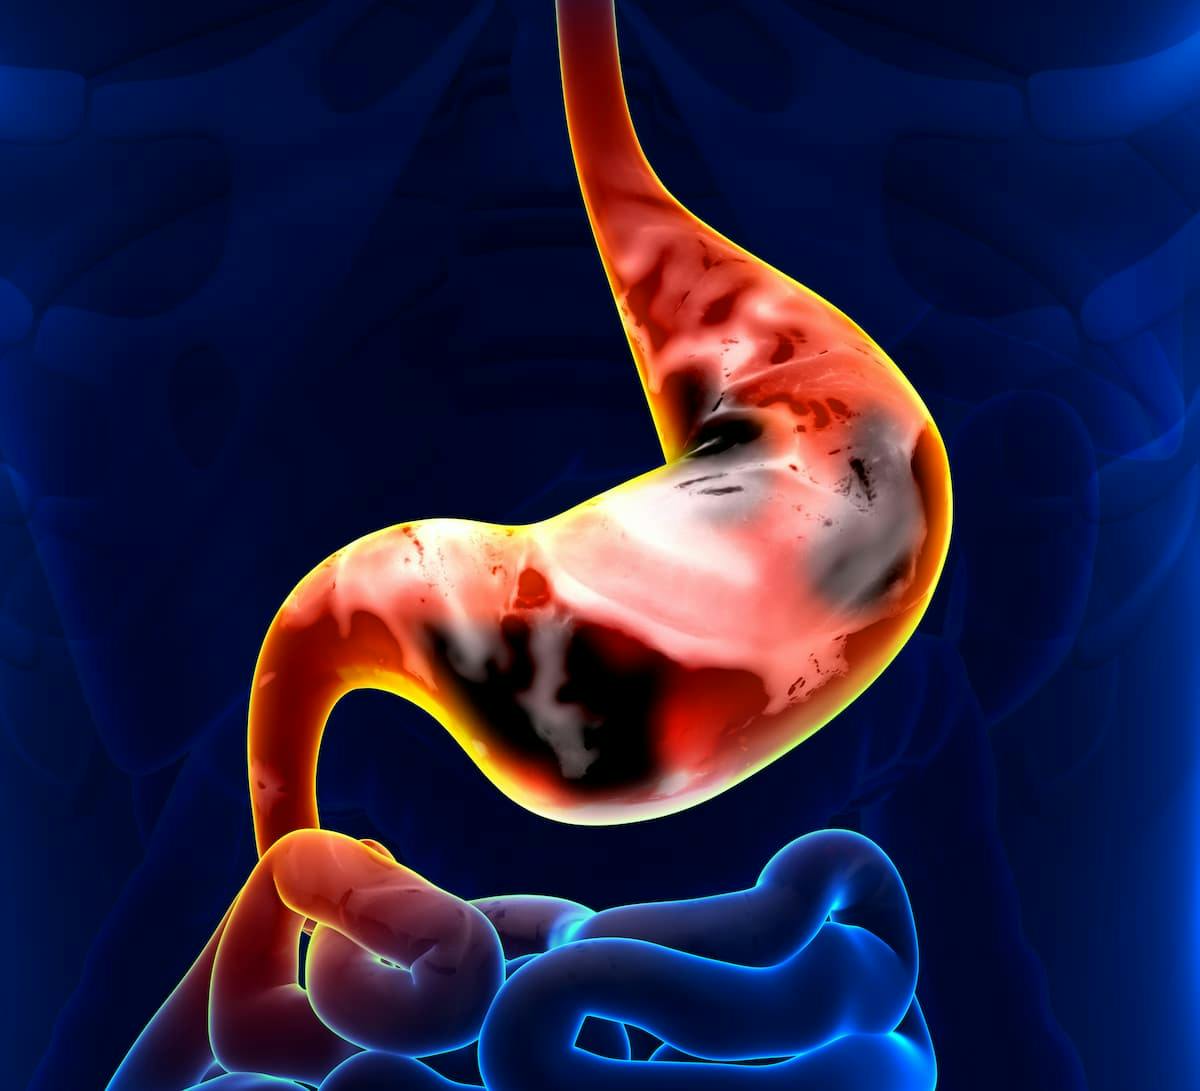 “The study demonstrated an encouraging efficacy and manageable safety profile of neoadjuvant sintilimab plus FLOT in HER2-negative locally advanced gastric/GEJ cancer, which suggested a potential therapeutic option for this population,” according to the study authors.